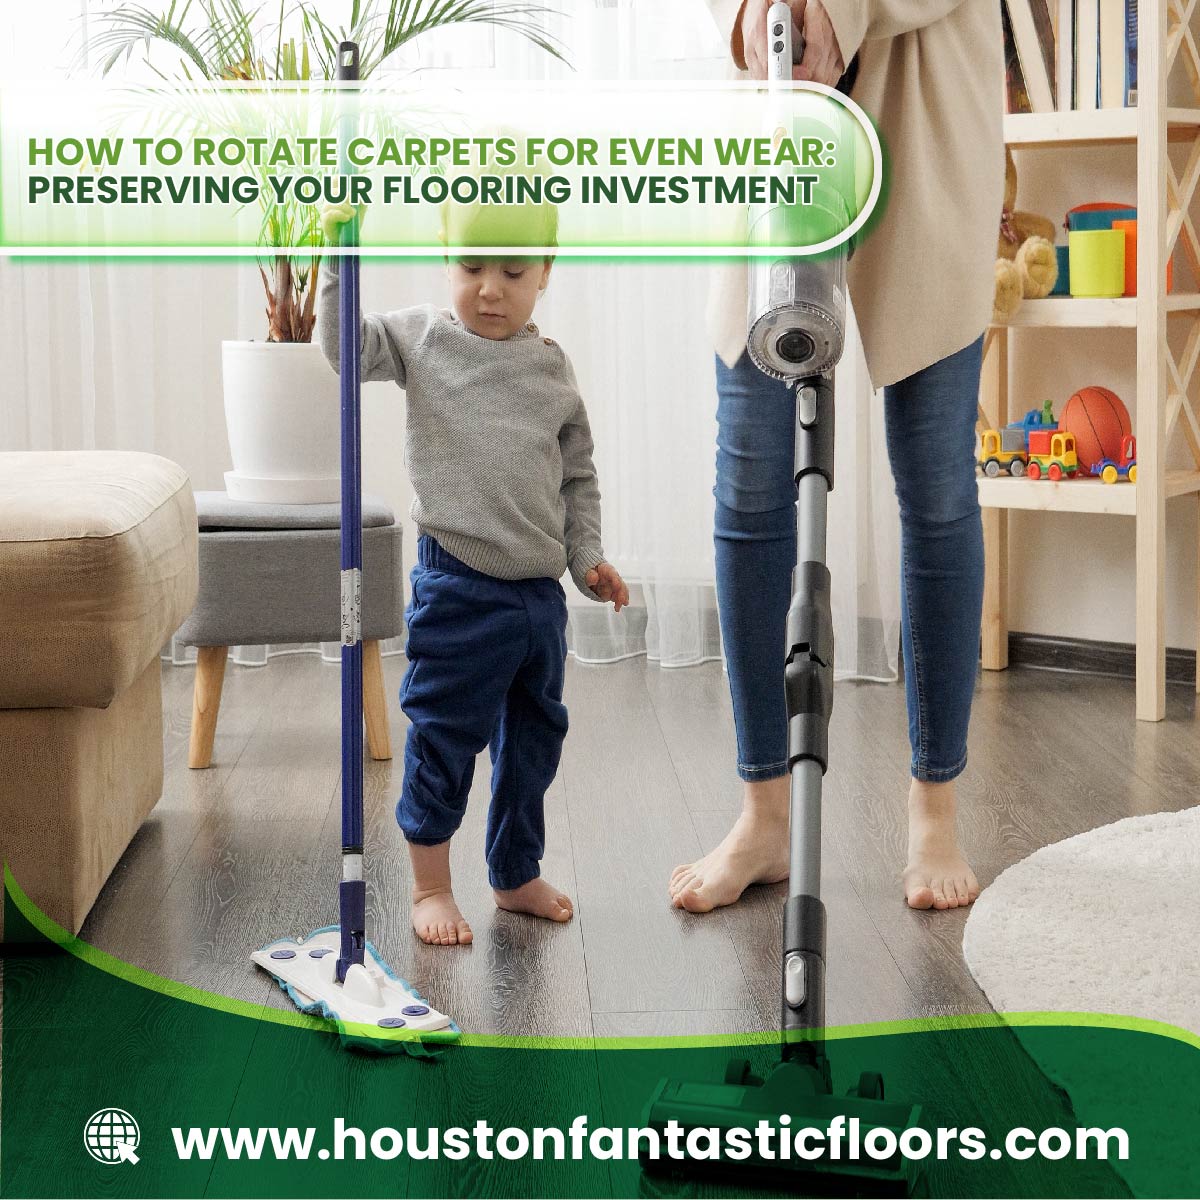 How to Rotate Carpets for Even Wear: Preserving Your Flooring Investment